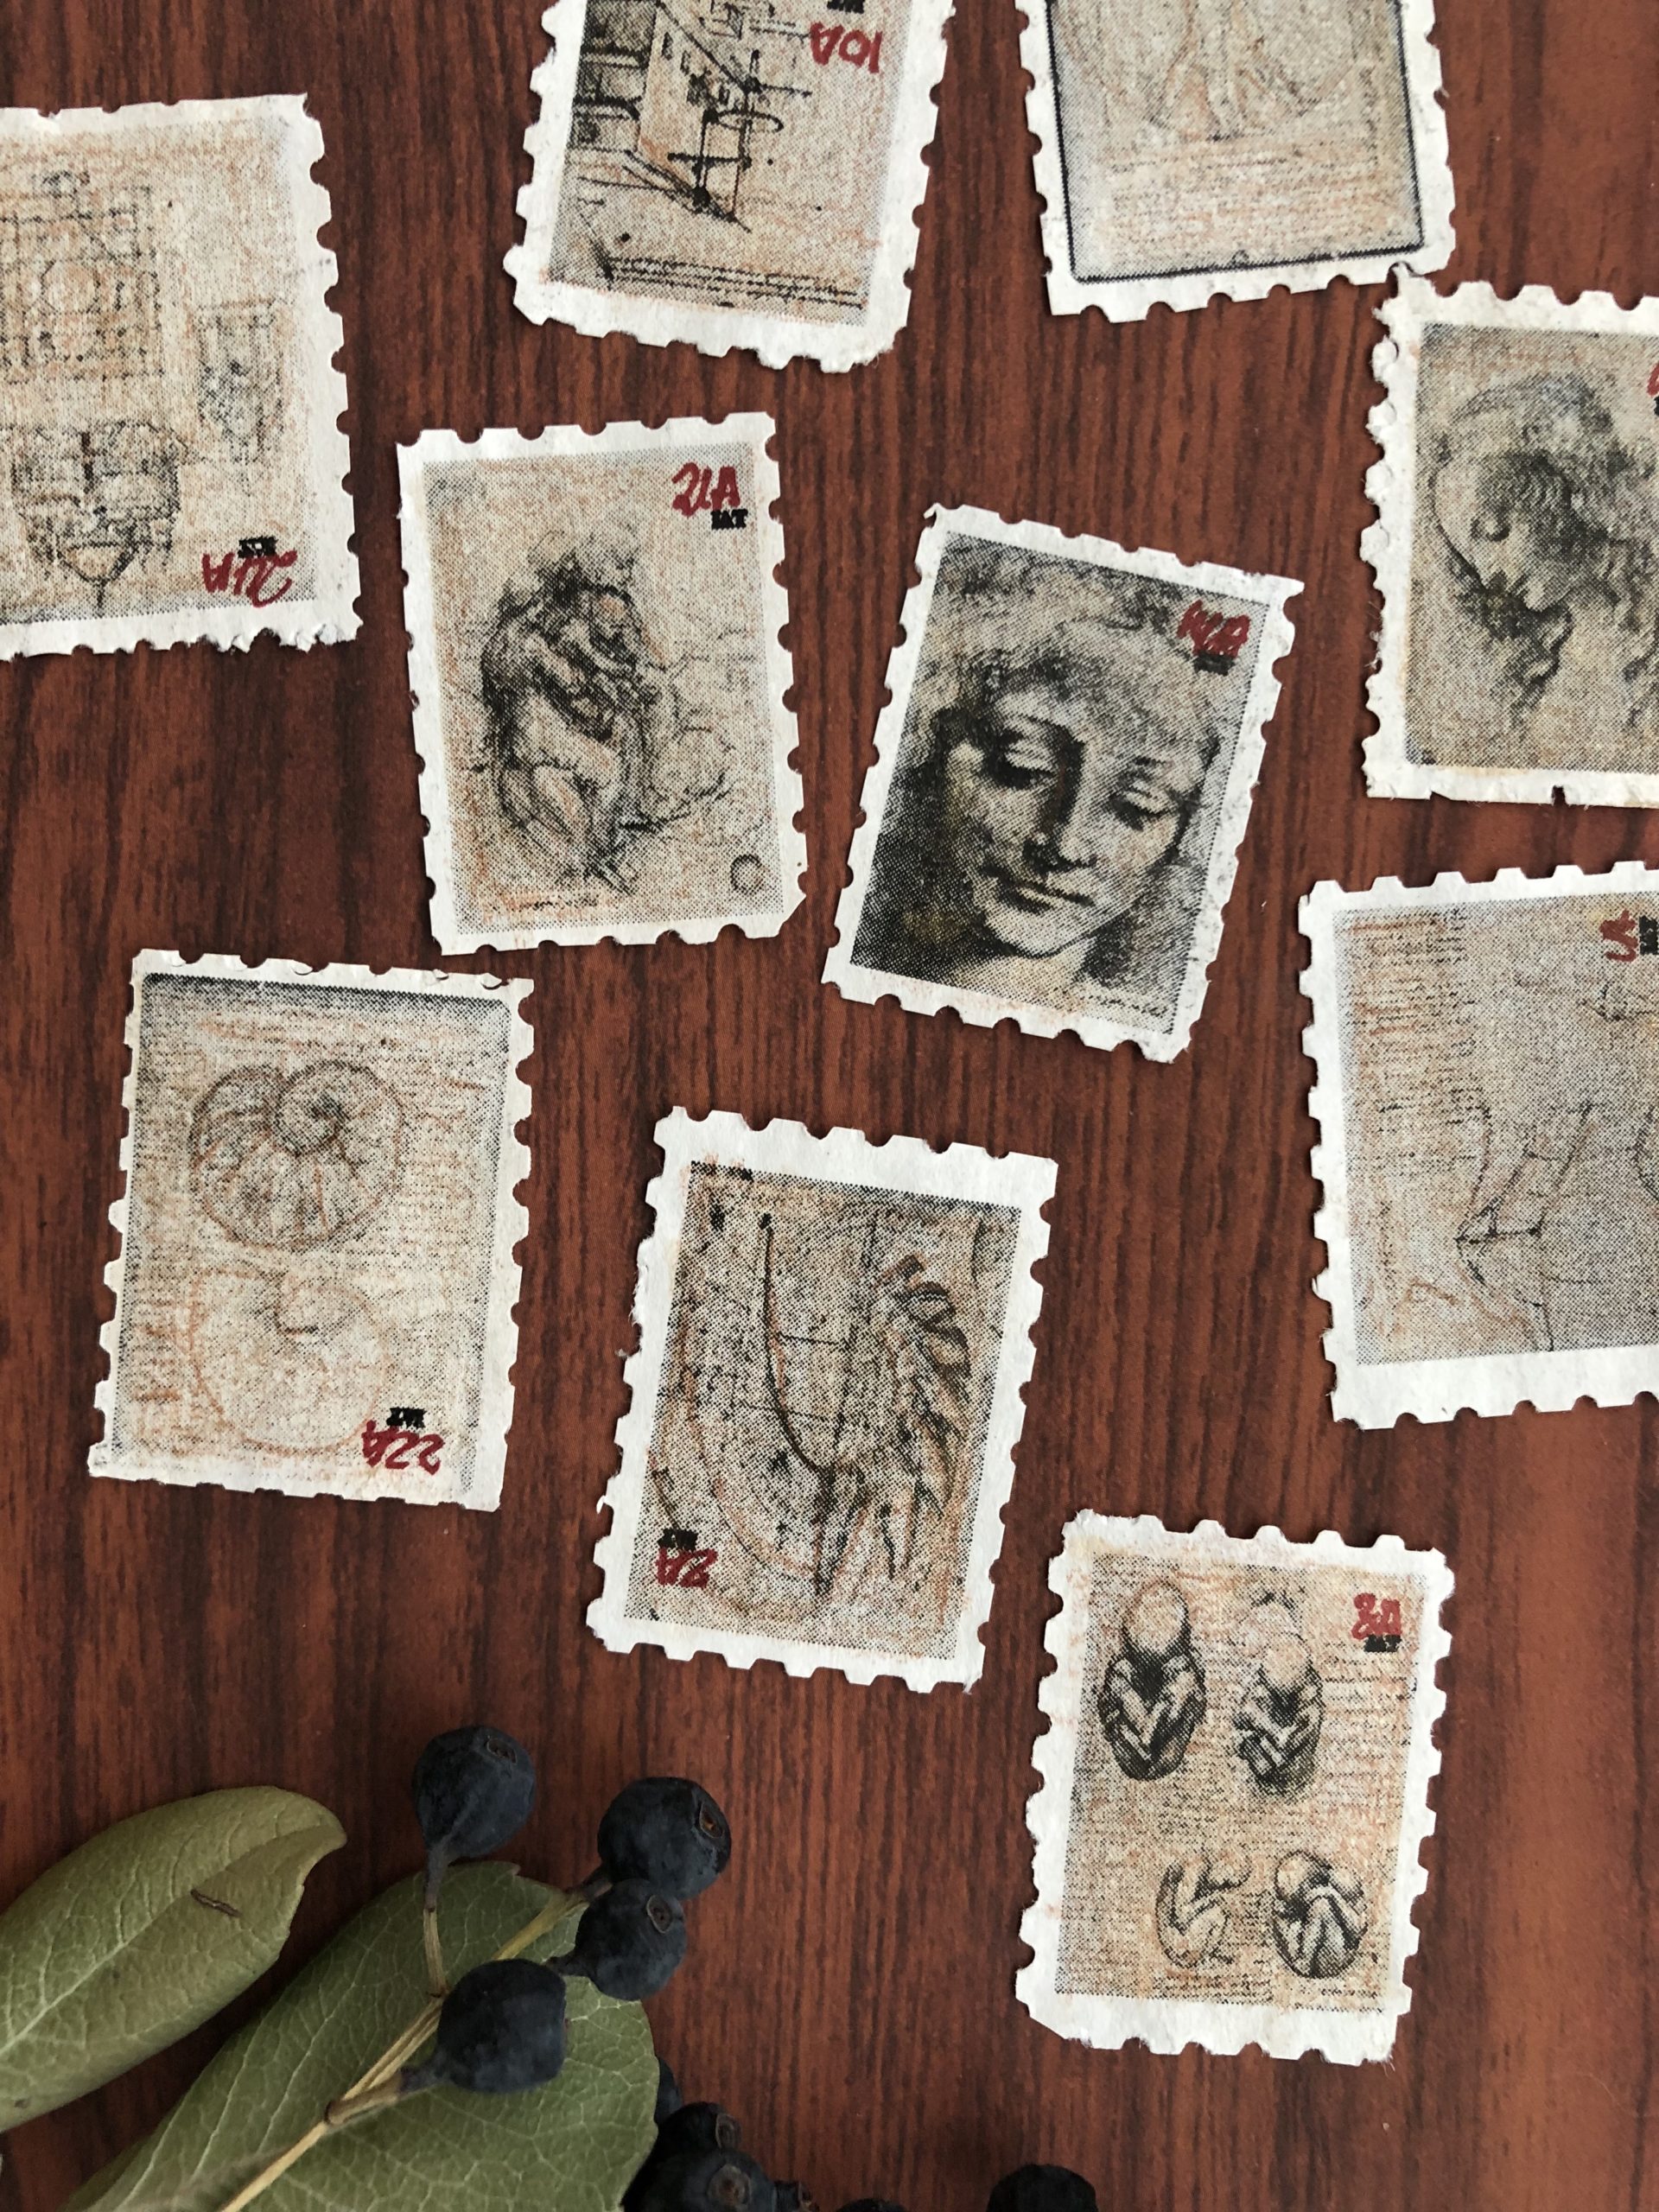 Some of Betty's handmade, hand-cut faux postage stamps